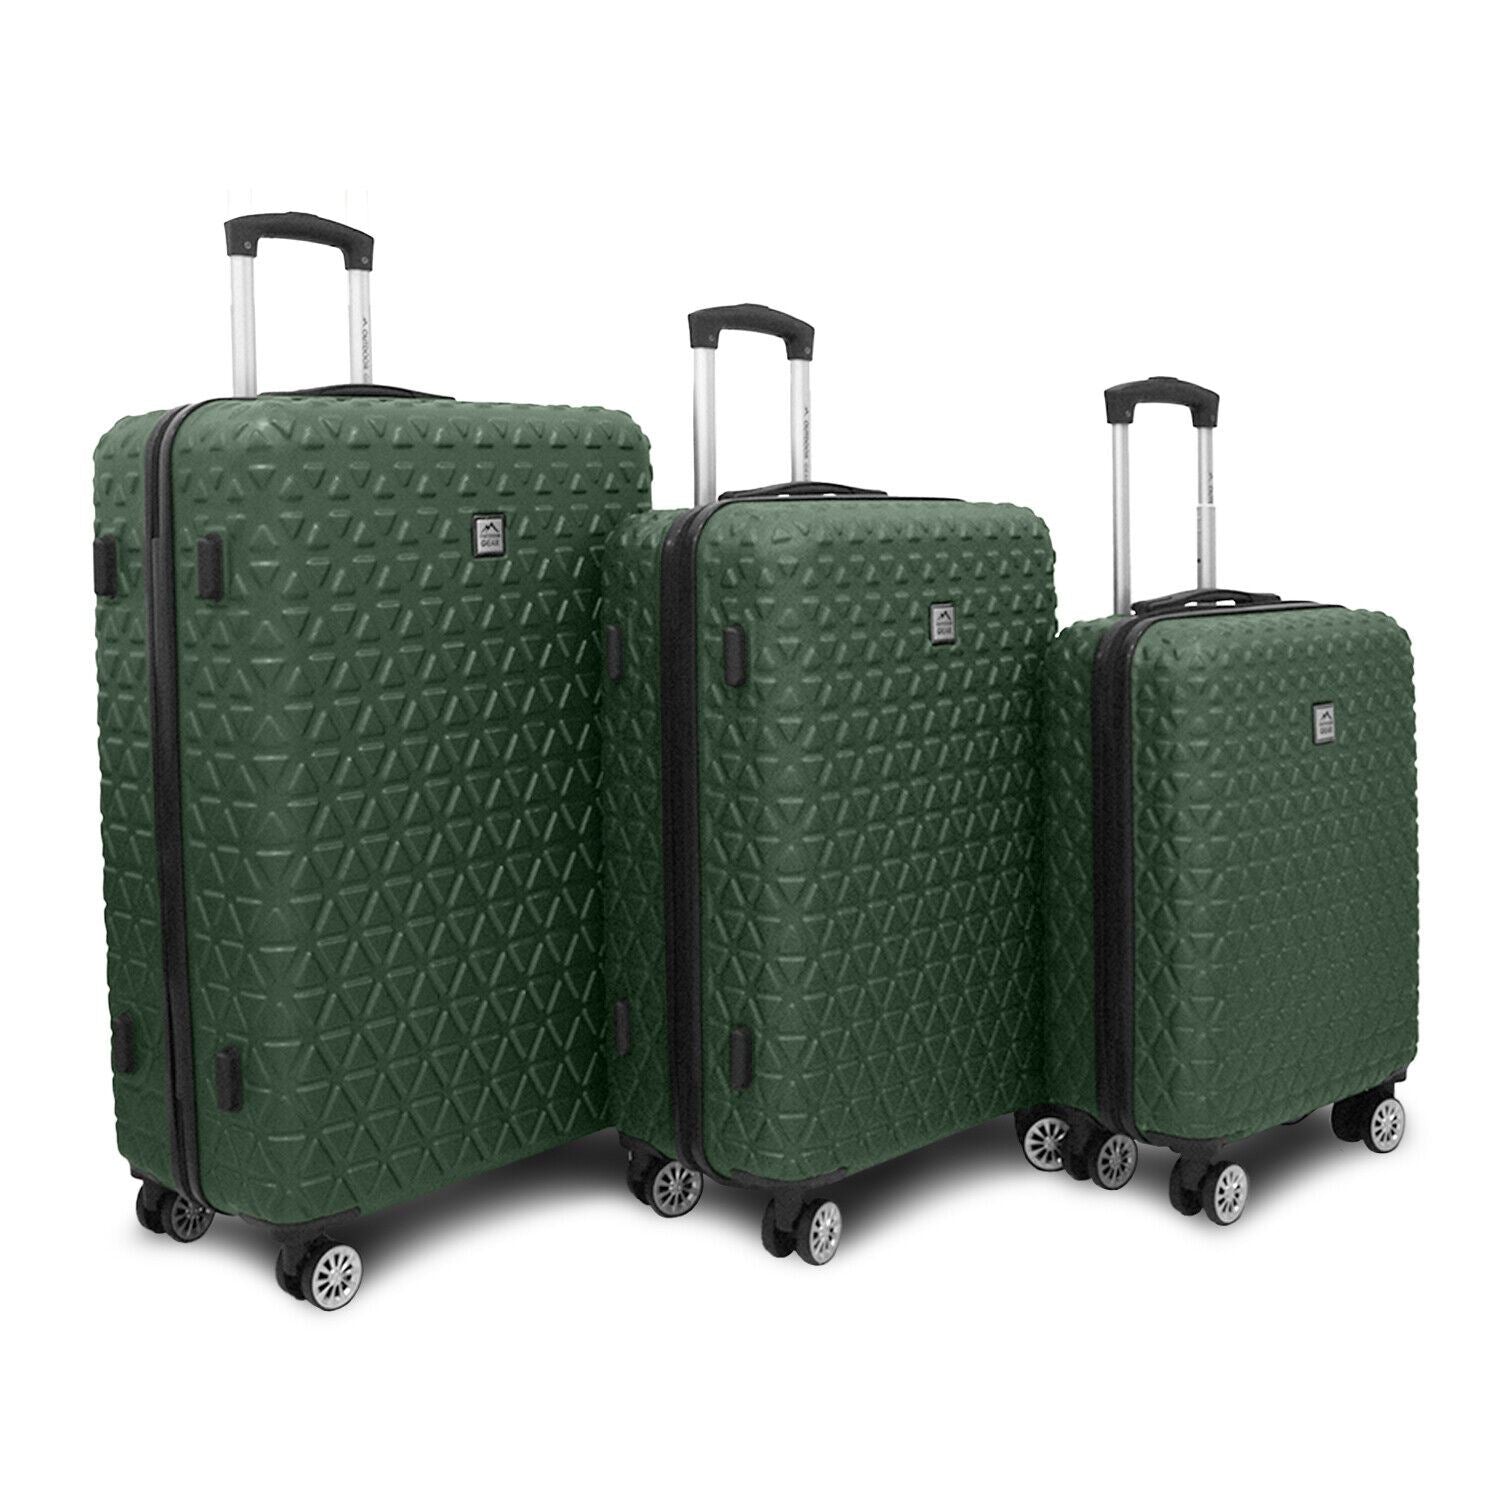 Adamsville Set of 3 Hard Shell Suitcase in Green